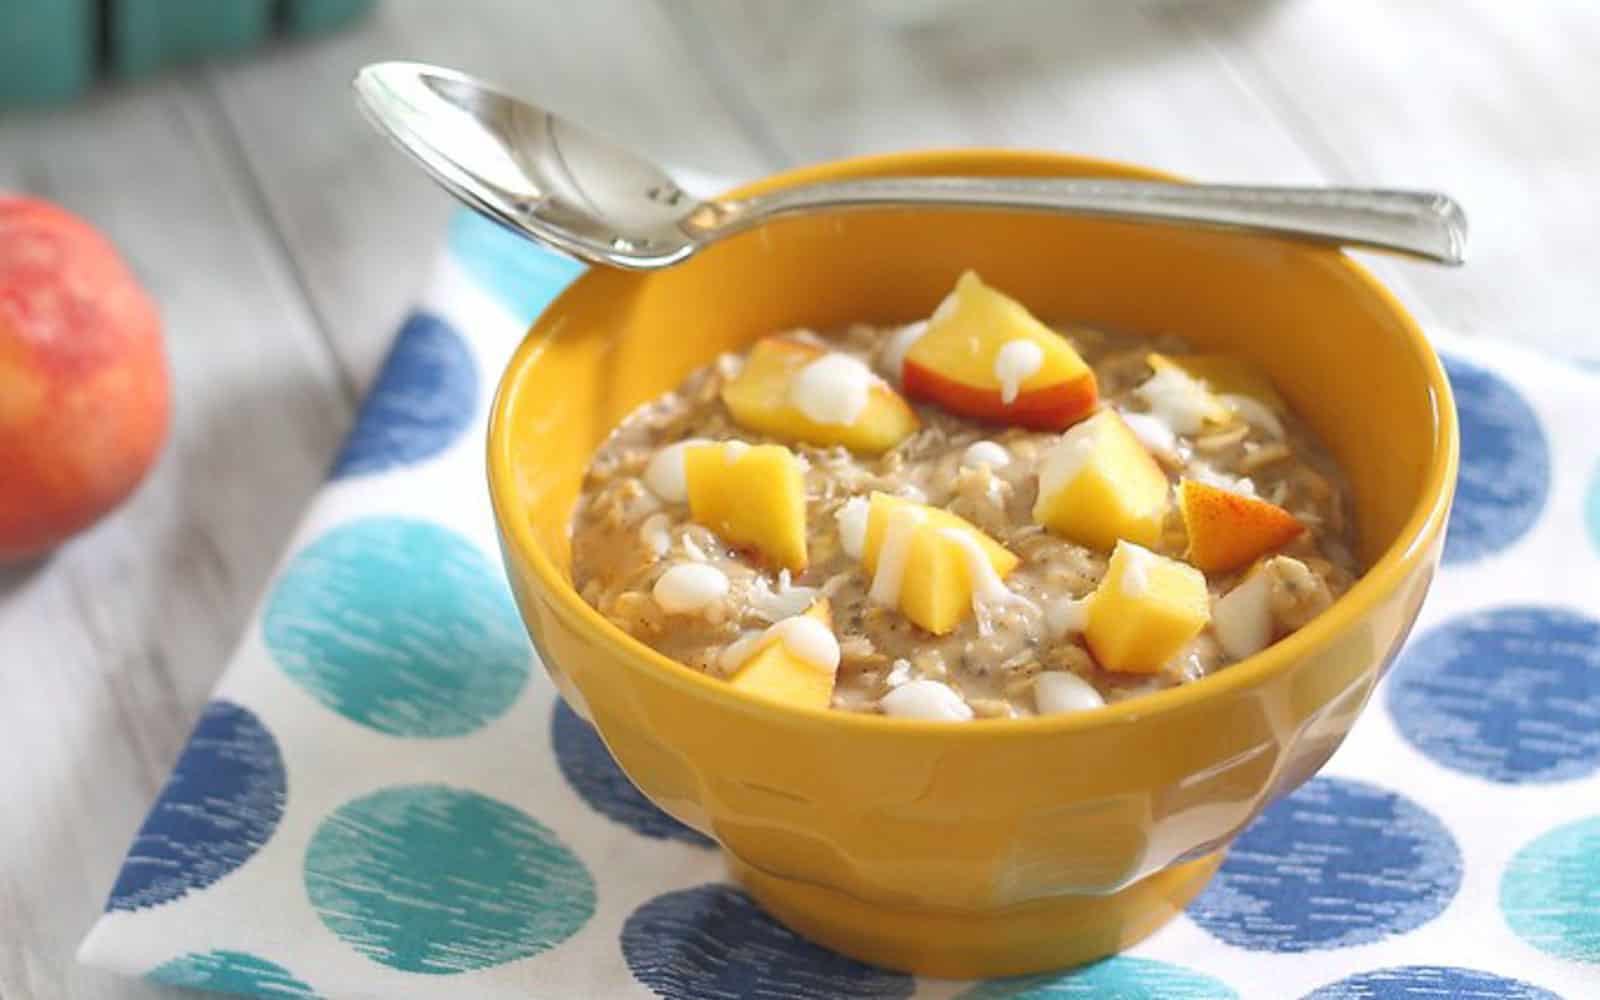 Peaches and cream oatmeal topped with chopped peaches and coconut cream drizzle in a yellow bowl.